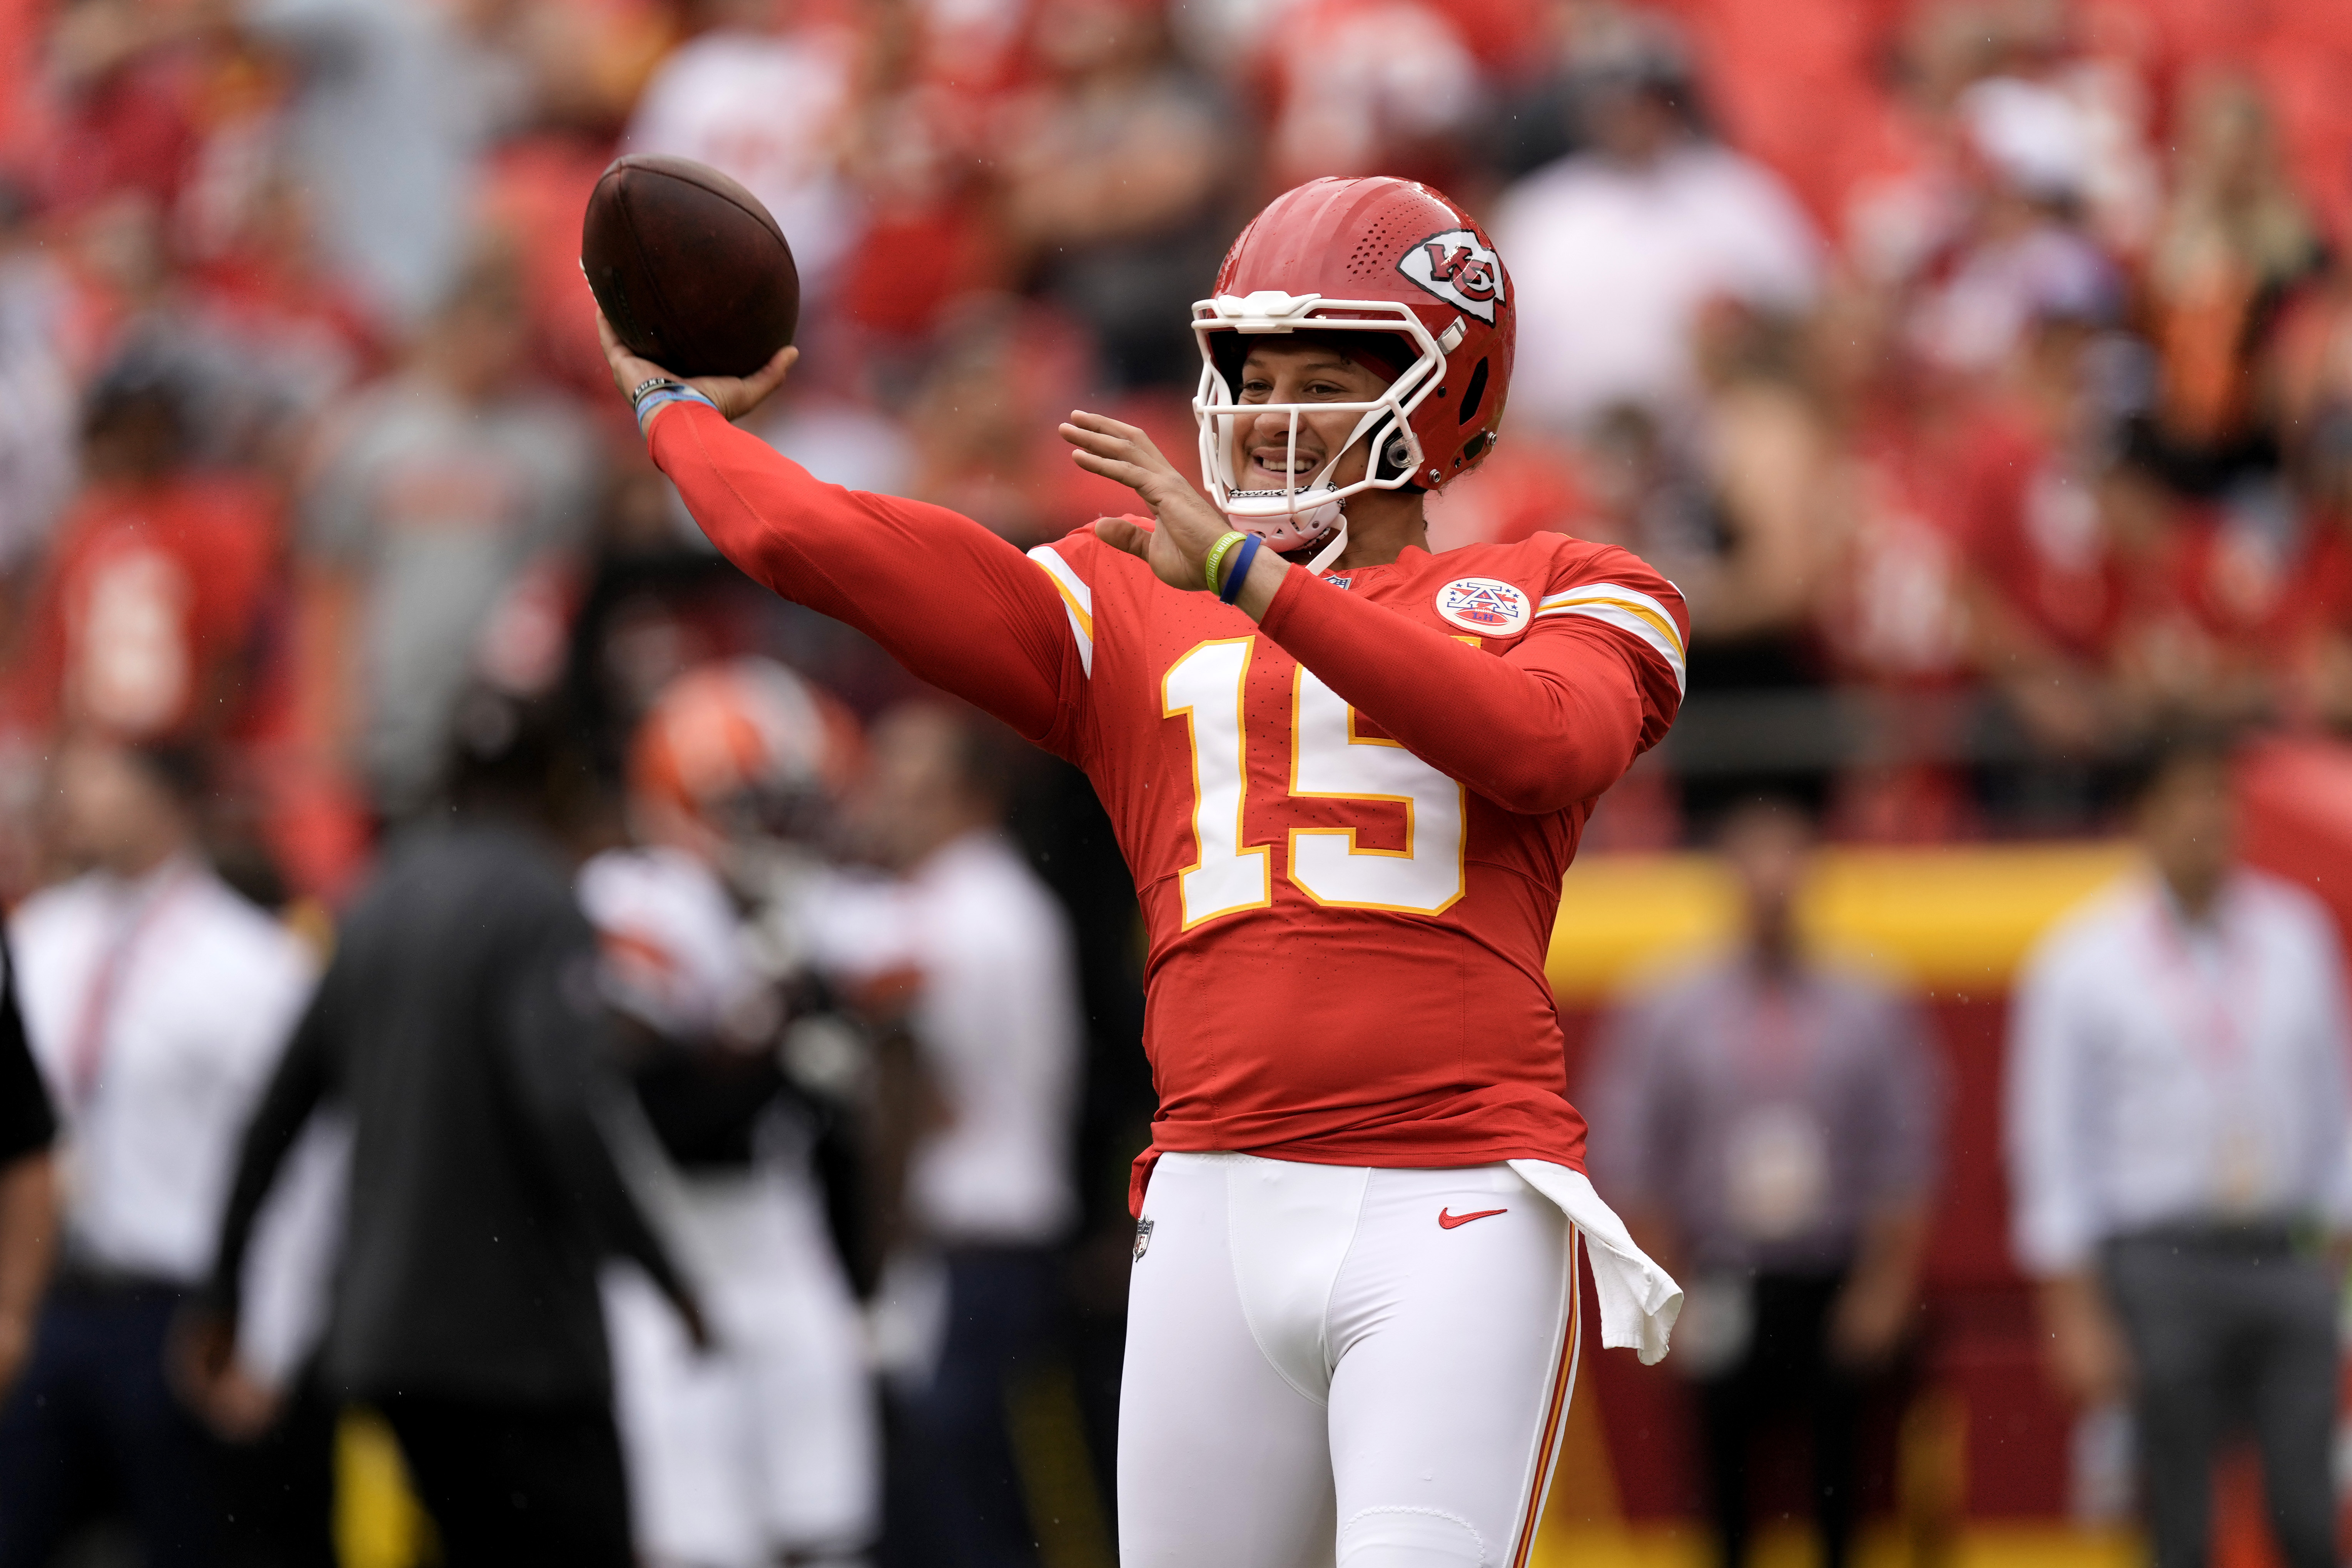 Best DraftKings Promo Code for NFL Week 1: $200 instantly on Lions vs Chiefs